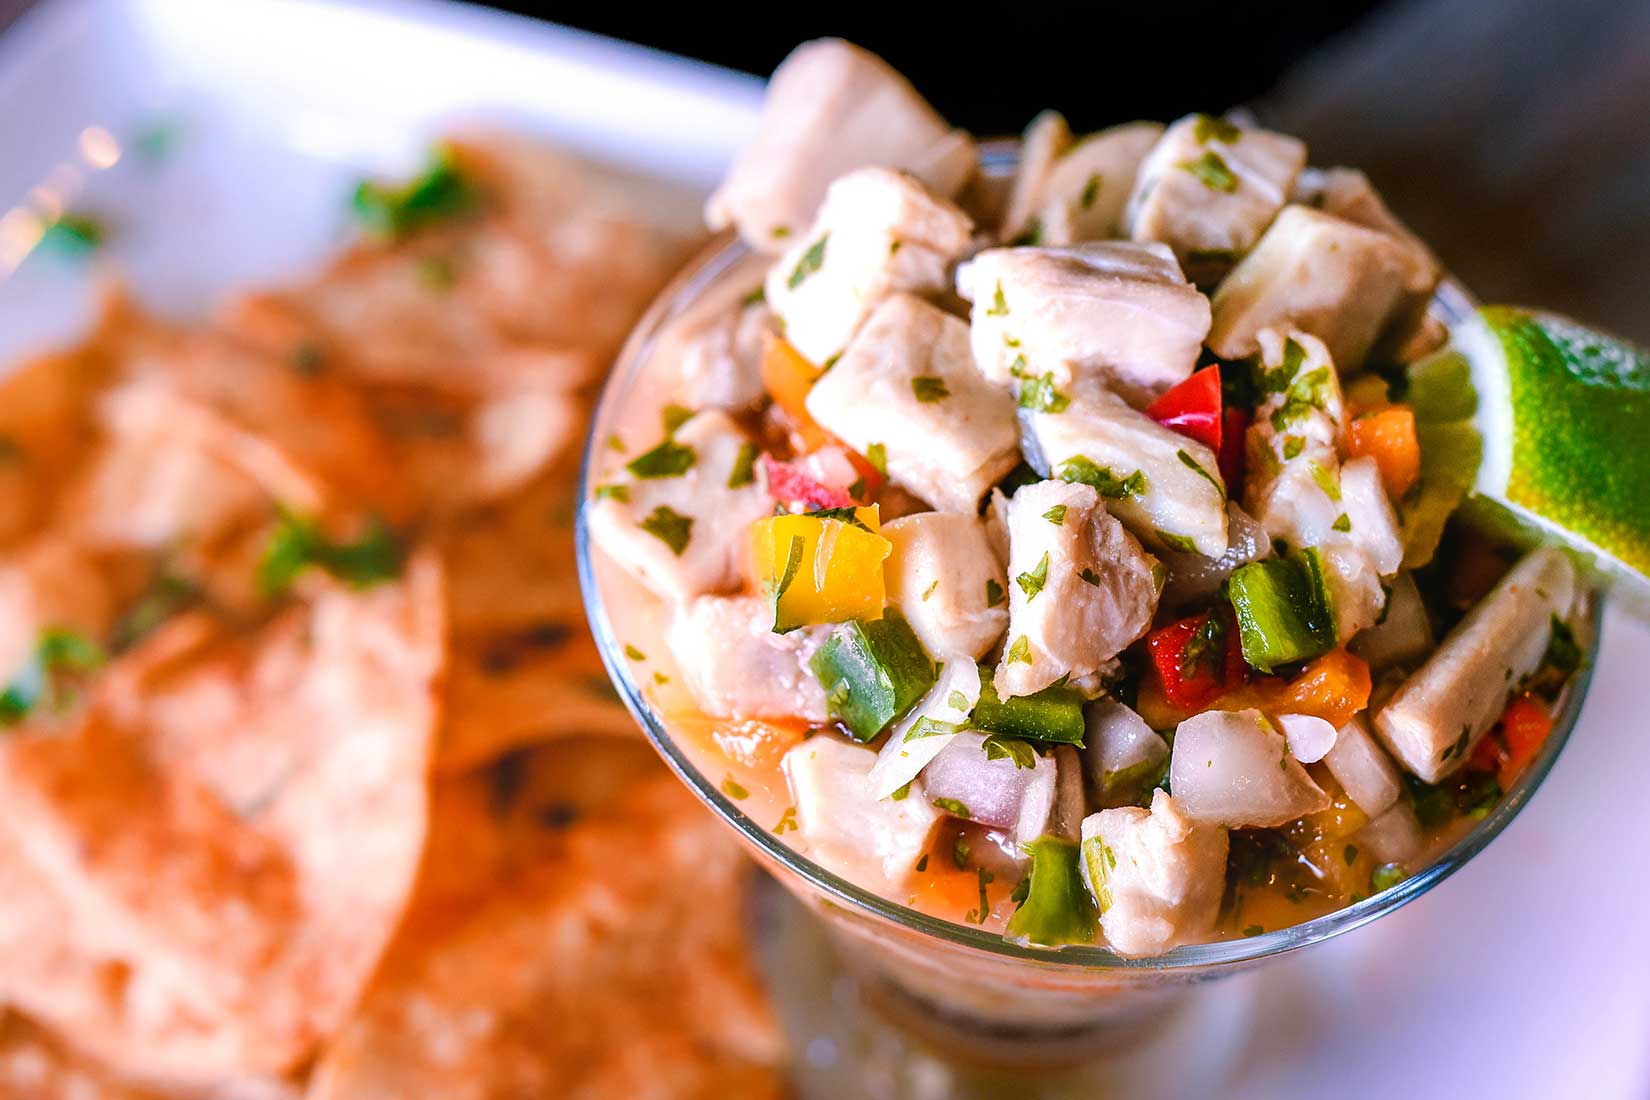 Cool Off with Ceviche